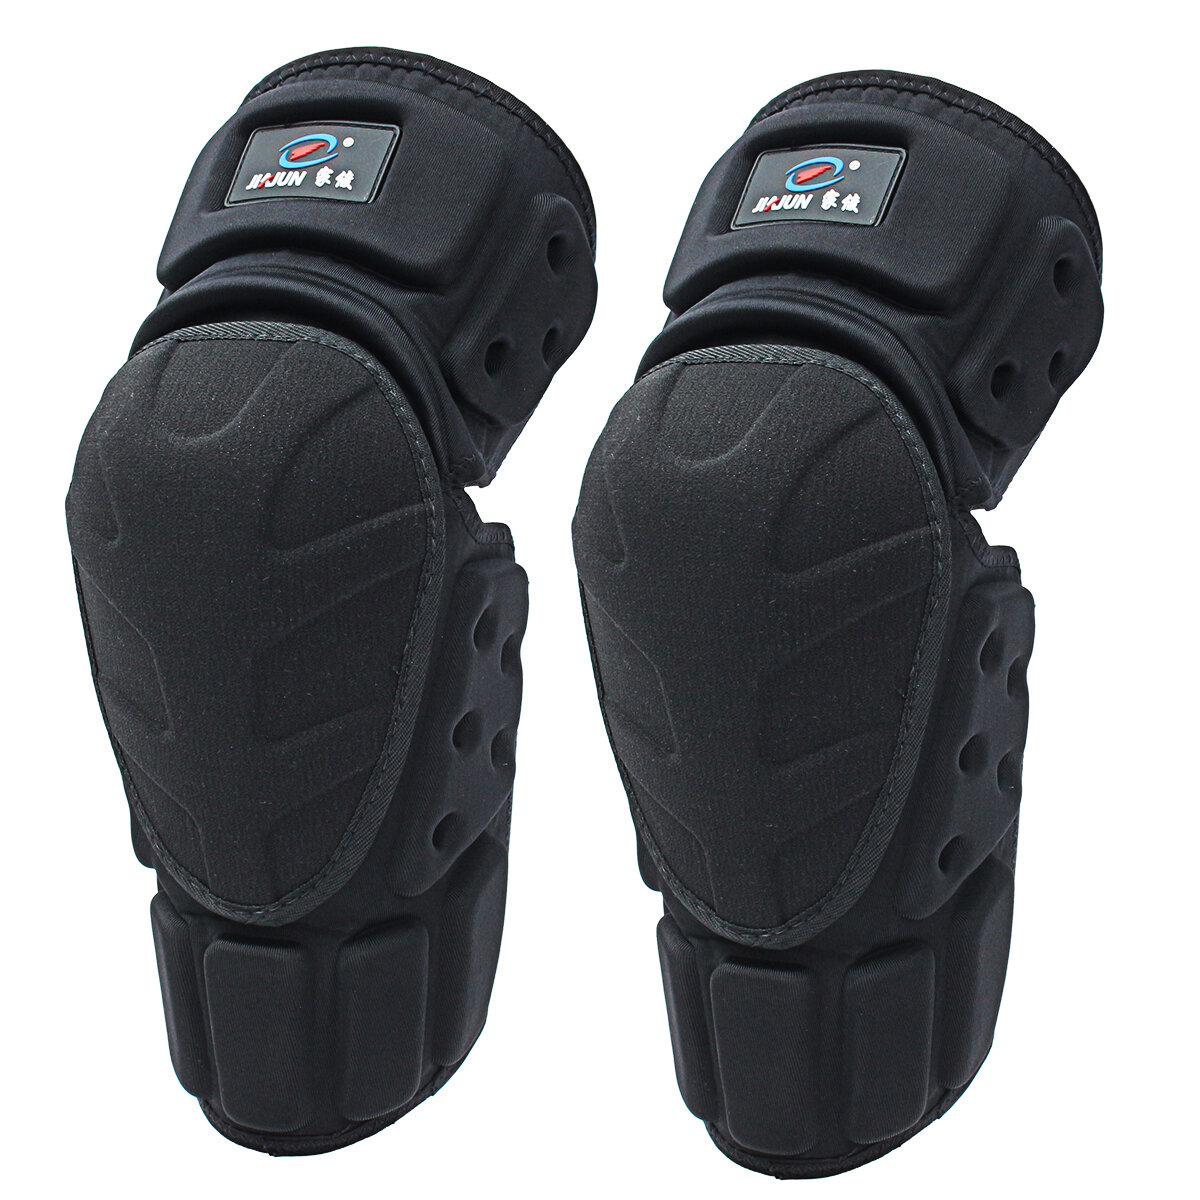 1 Pair Outdoor Moto Knee Pad Motorcycle Bicycle Black Protector Pads Knee Protective Guards